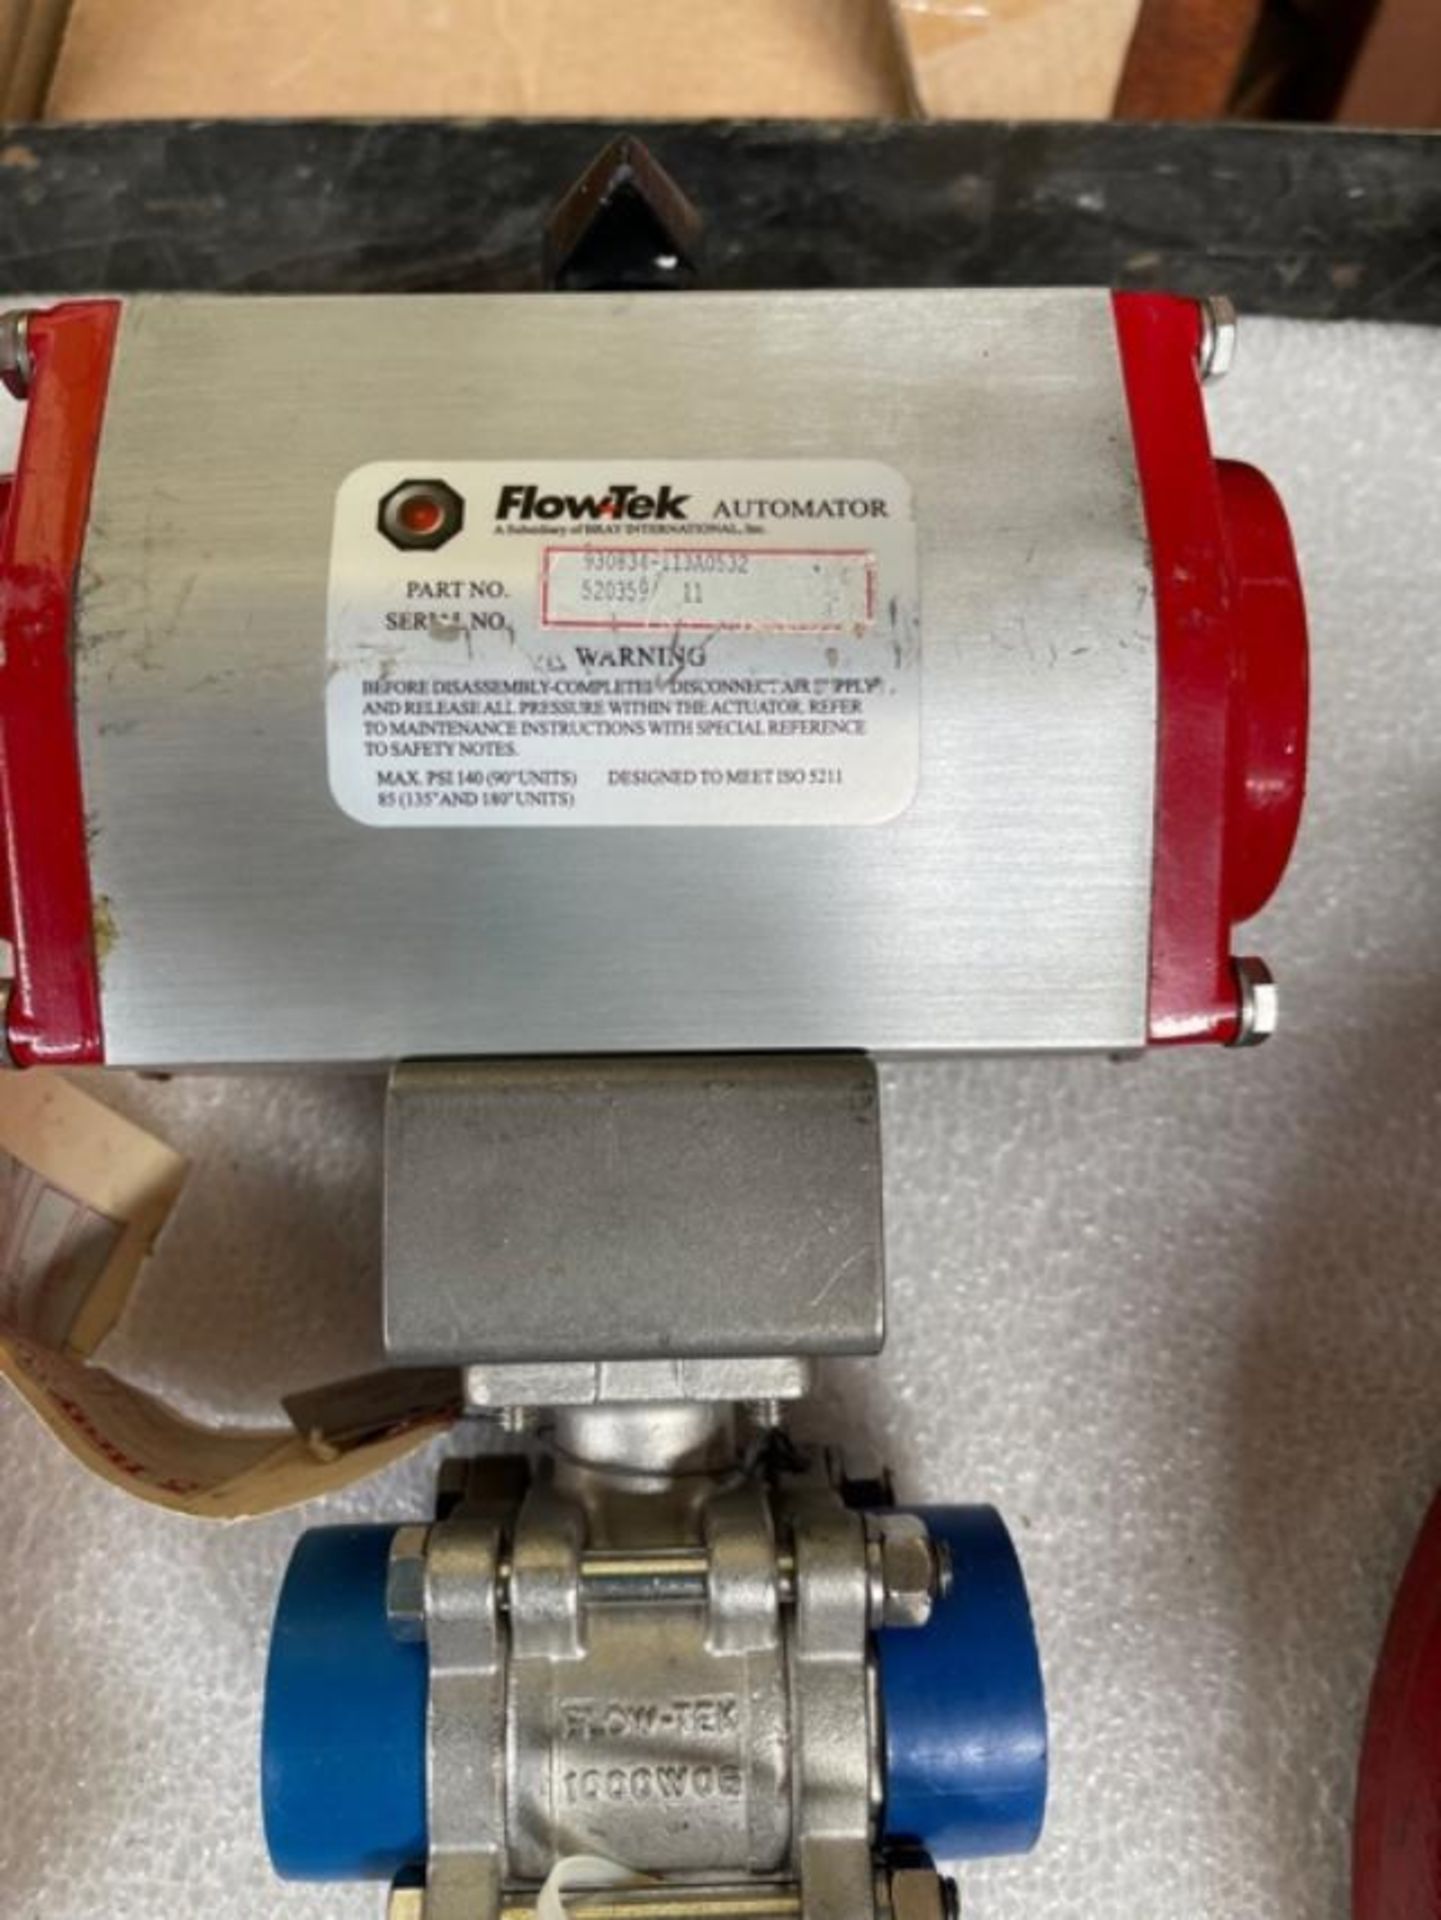 4 INCH WITH REVOLVE, 8 INCH WAFER VALVE, BREE 1 INCH 1” STAINLESS STEEL BALL VALVE WITH PNEUMATIC - Image 5 of 8